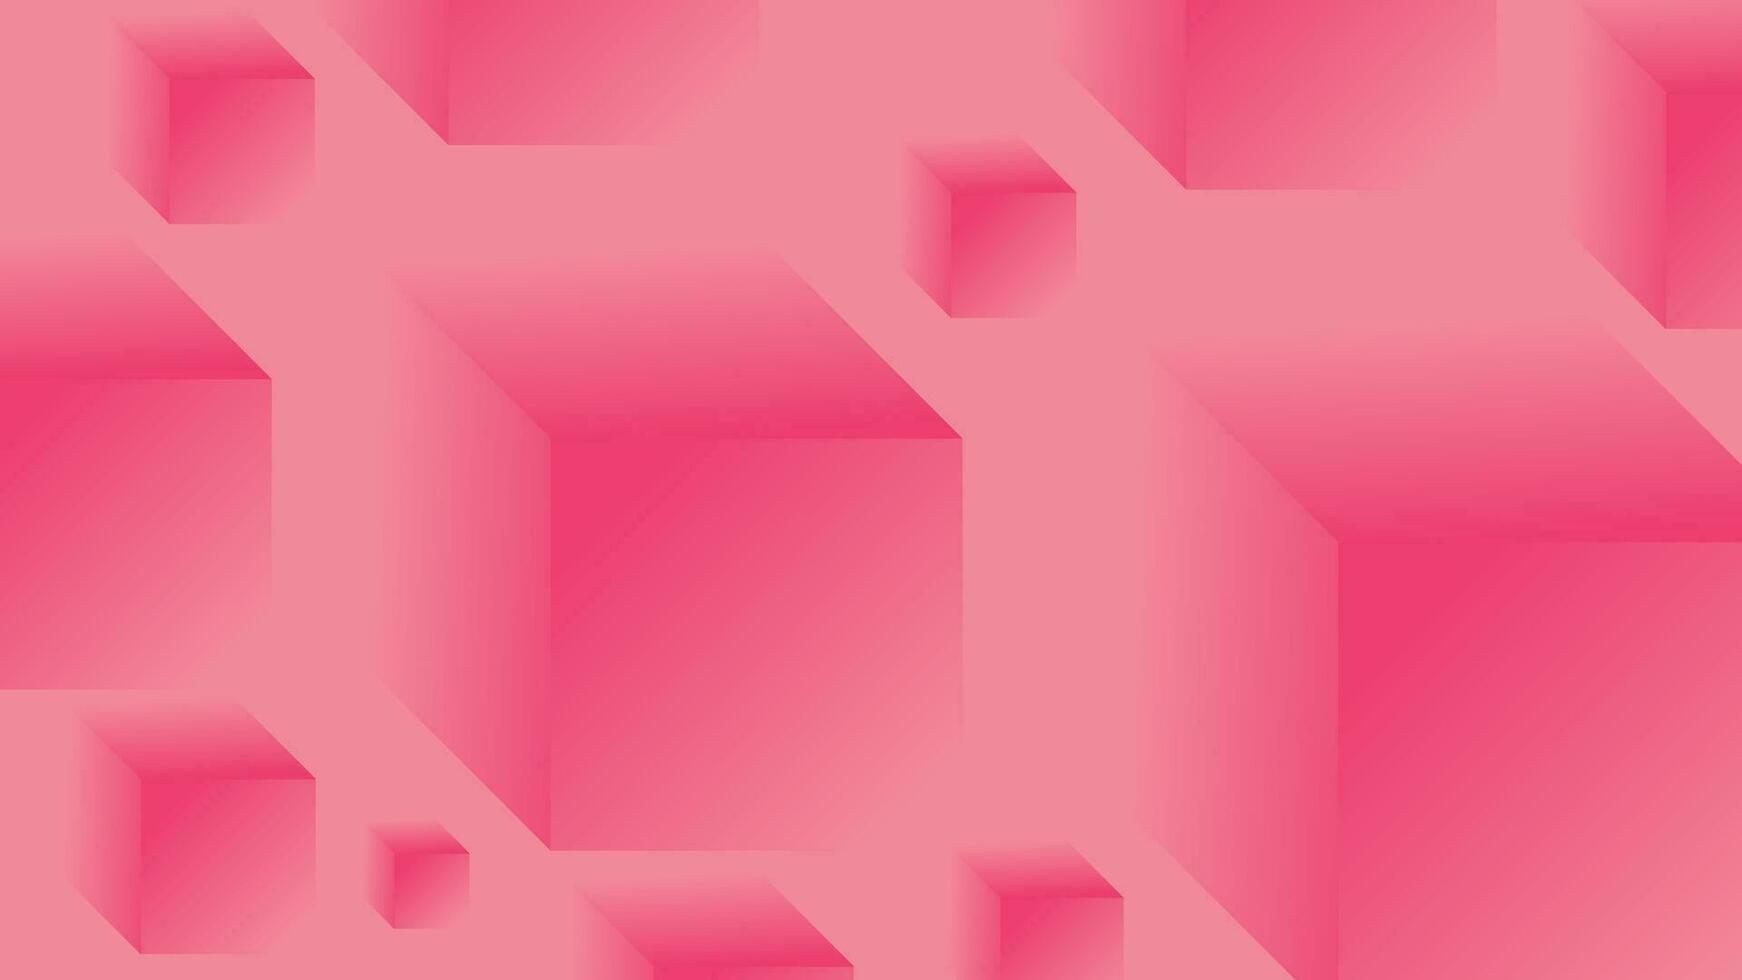 4K ultra high definition Modern abstract background, cube shape, pink color, use for decorative, illustration, backdrop, wallpaper, background. vector